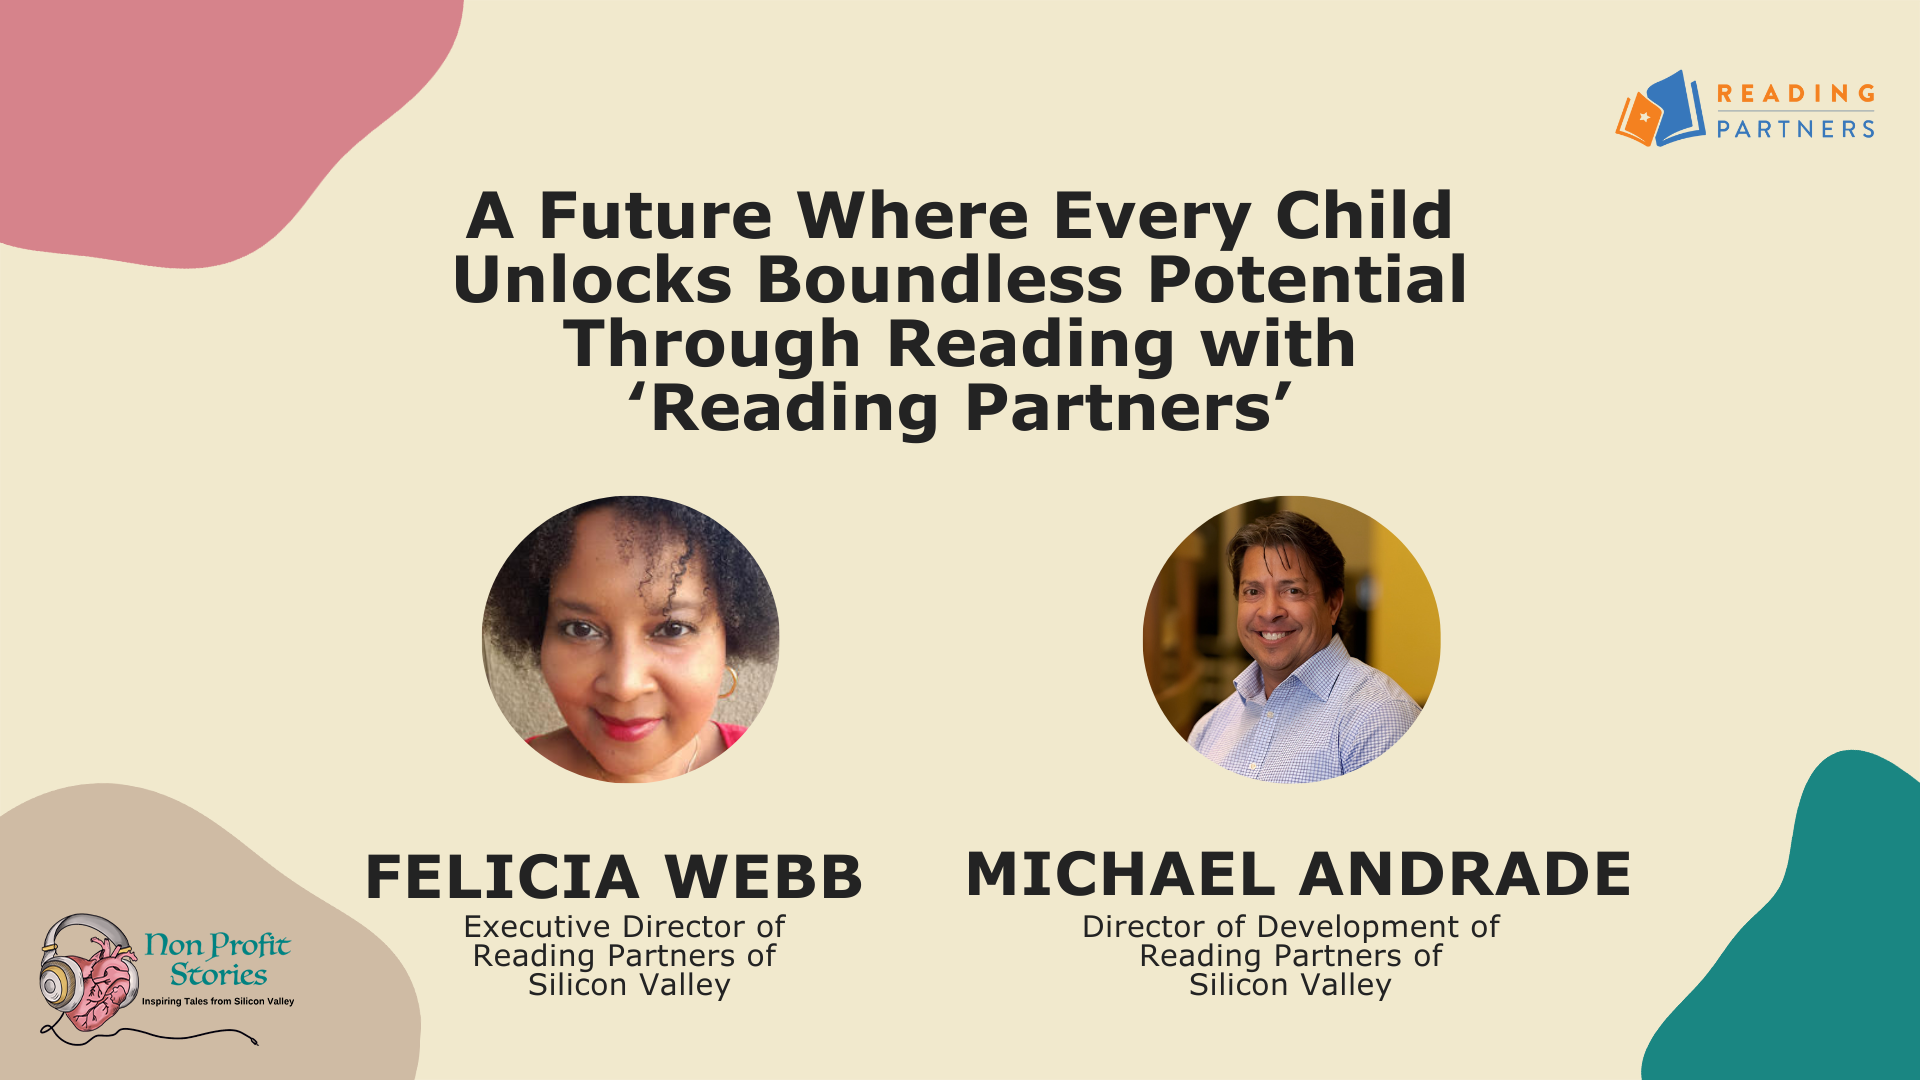 A Future Where Every Child Unlocks Boundless Potential Through Reading with ‘Reading Partners’ Video